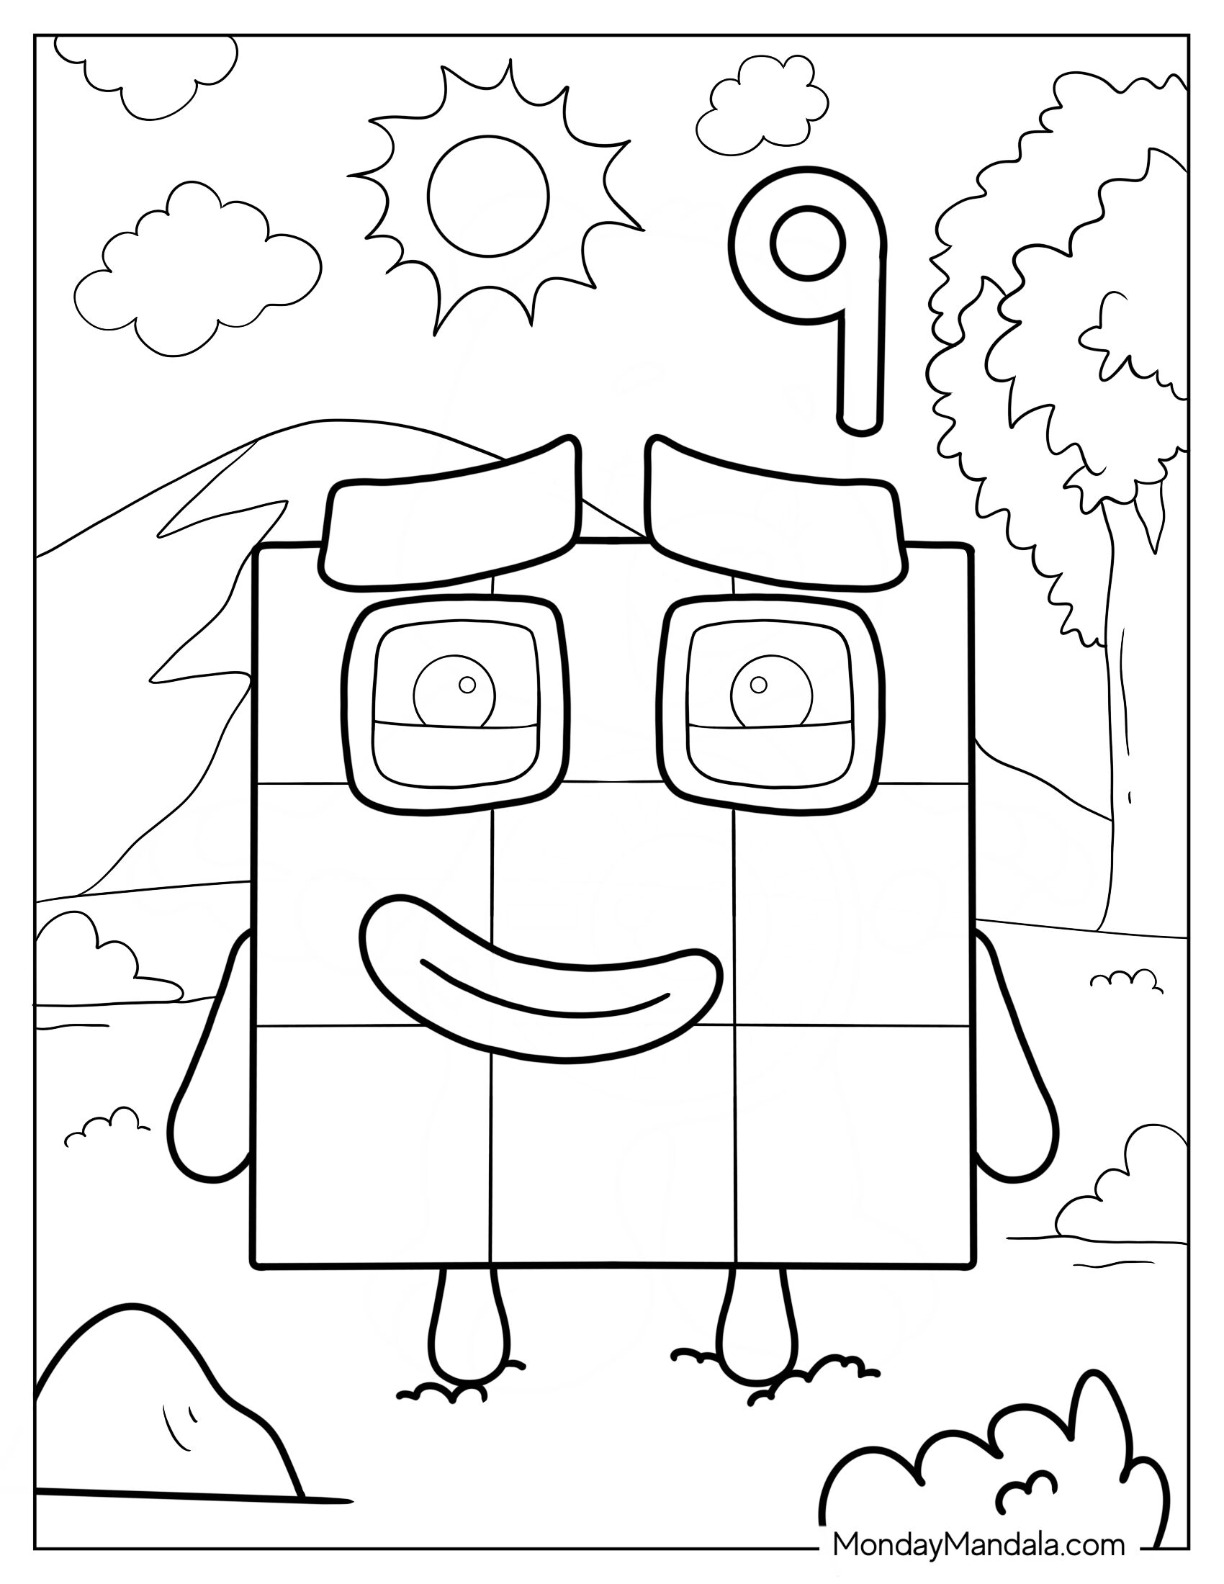 28 Numberblocks Coloring Pages (Free ...